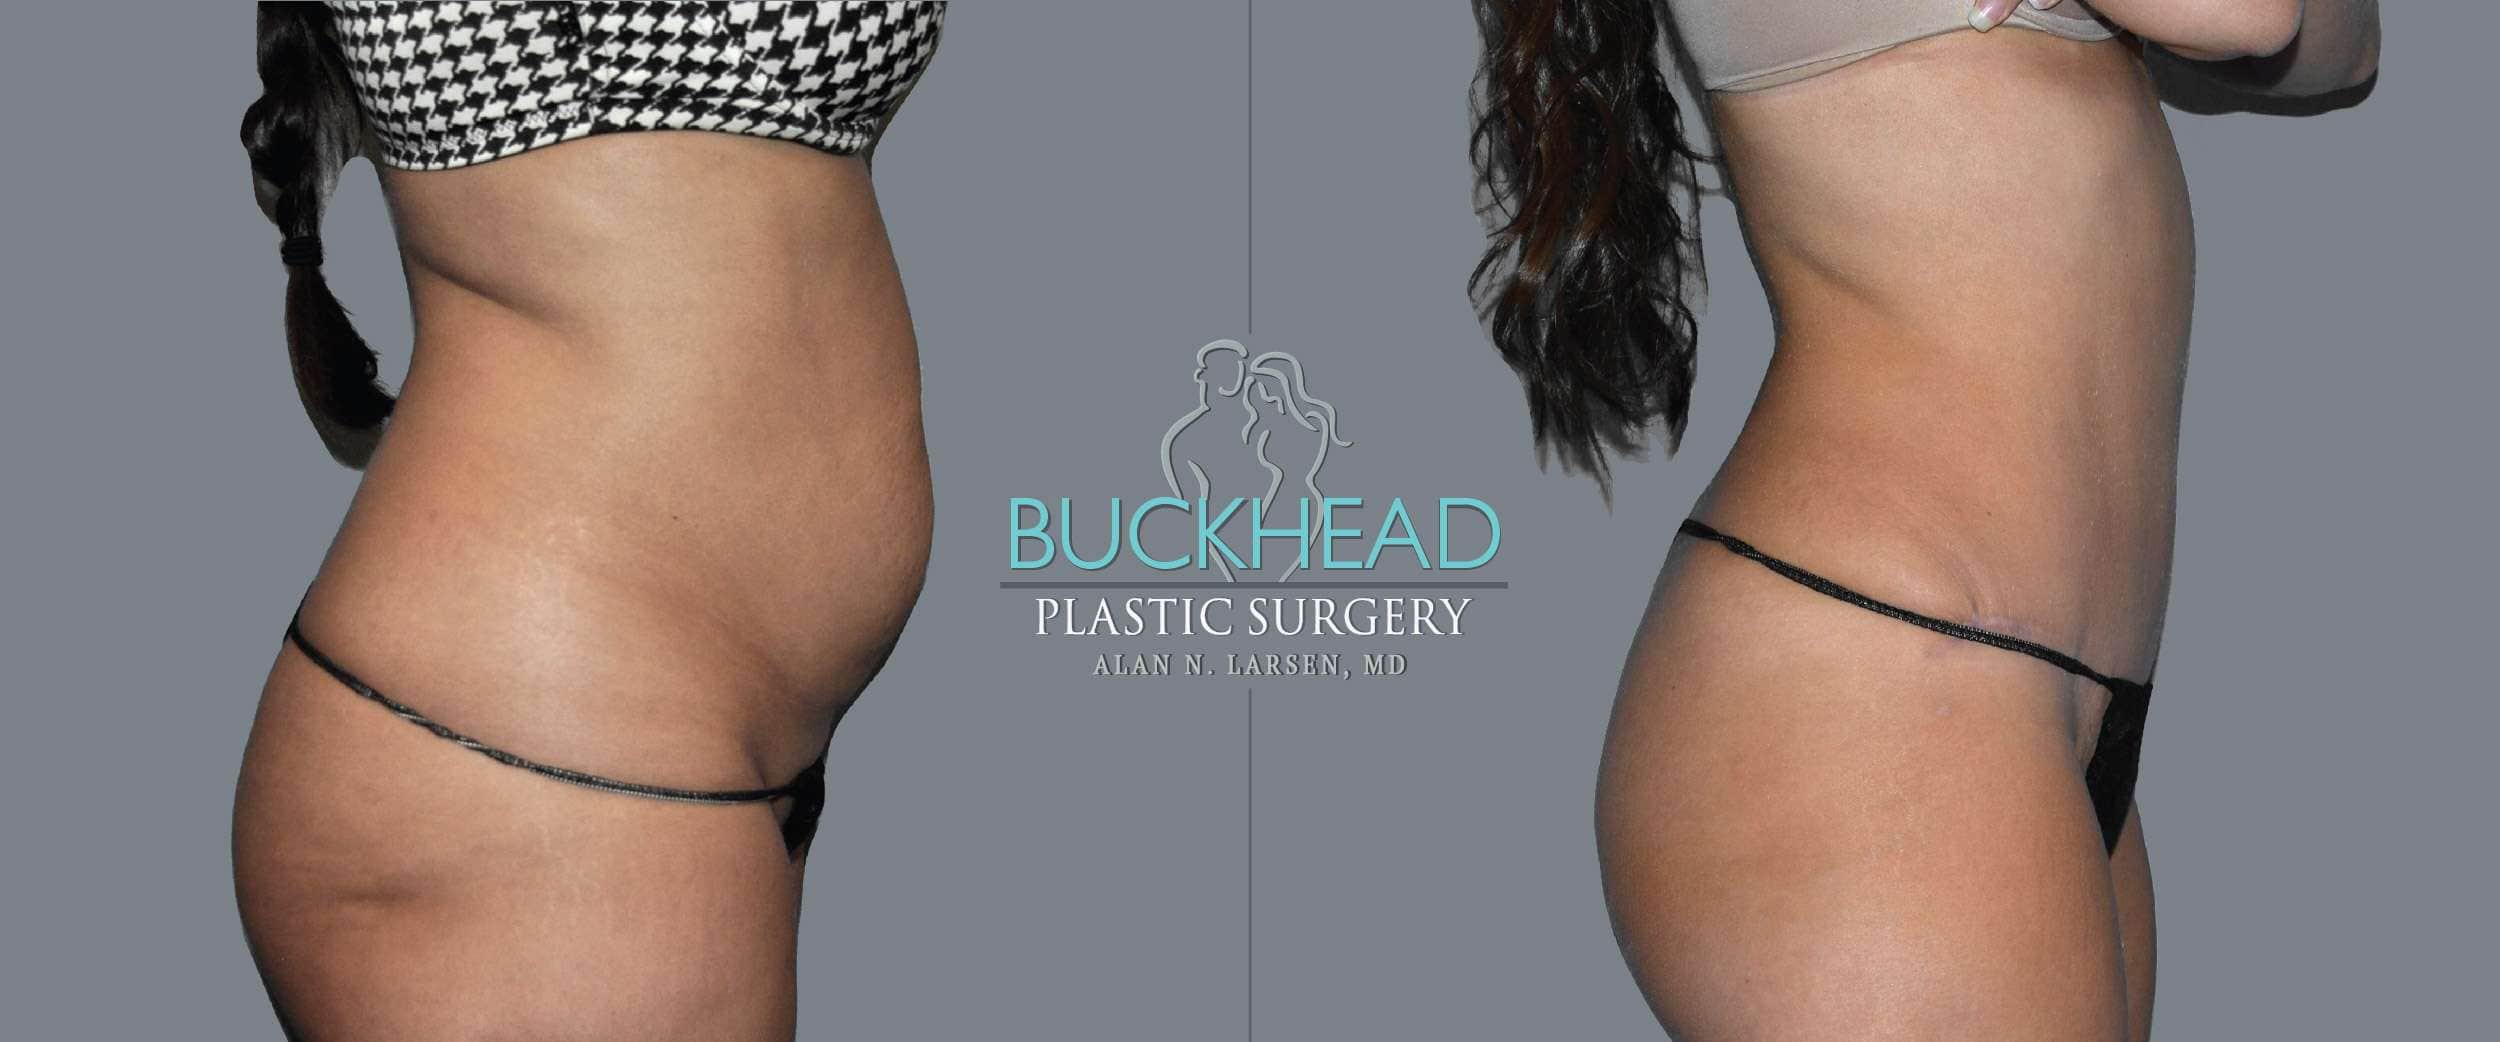 Before and After Photo Gallery | Liposuction - Hips & Flanks | Buckhead Plastic Surgery | Alan N. Larsen, MD | Double Board-Certified Plastic Surgeon | Atlanta GA